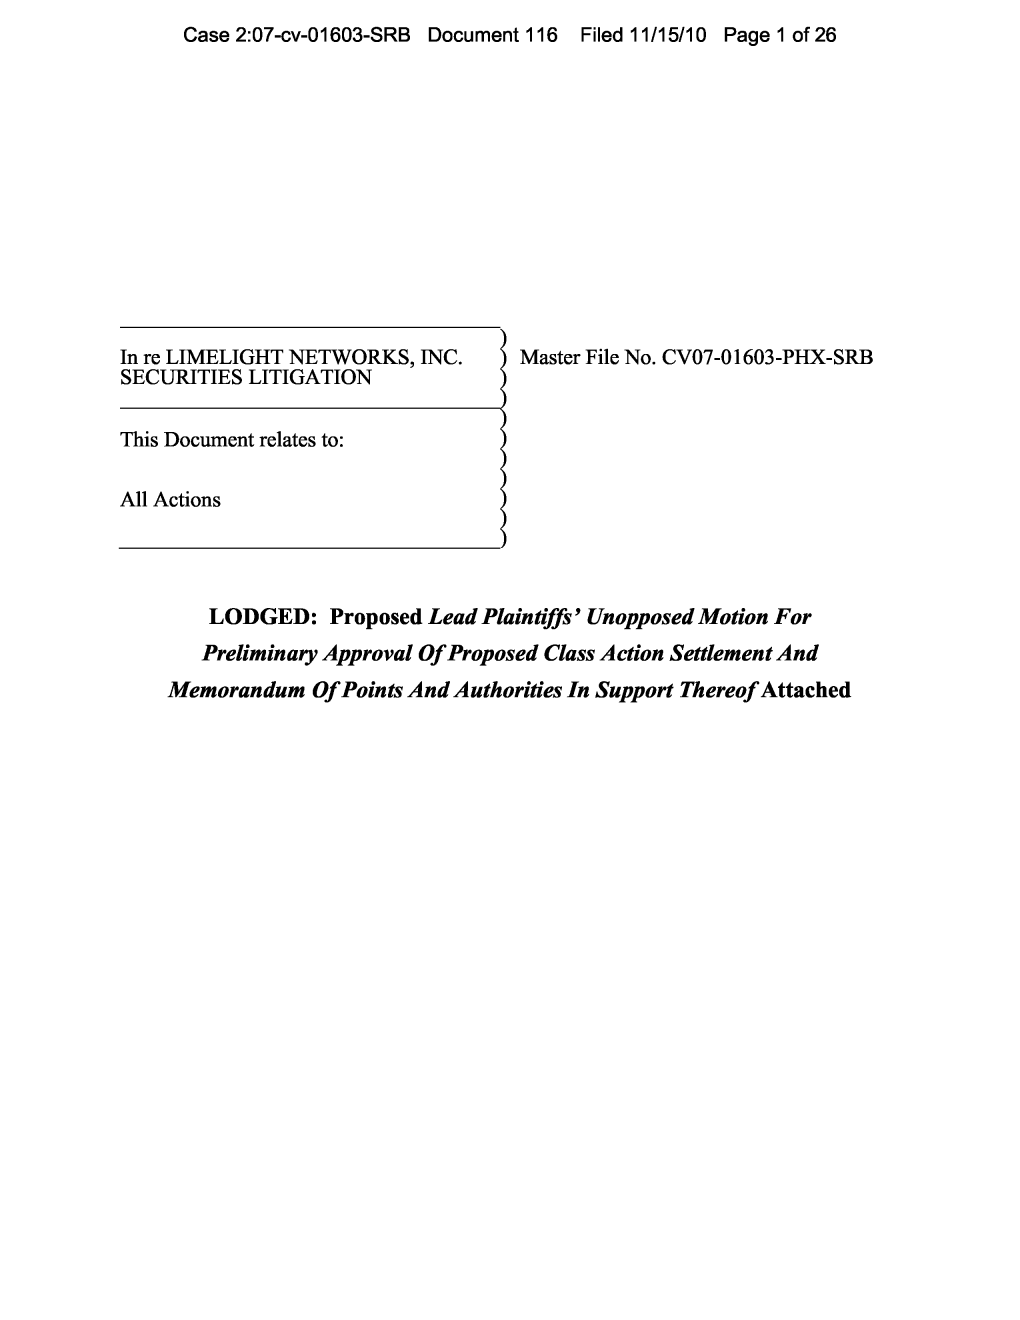 In Re Limelight Networks, Inc. Securities Litigation 07-CV-01603